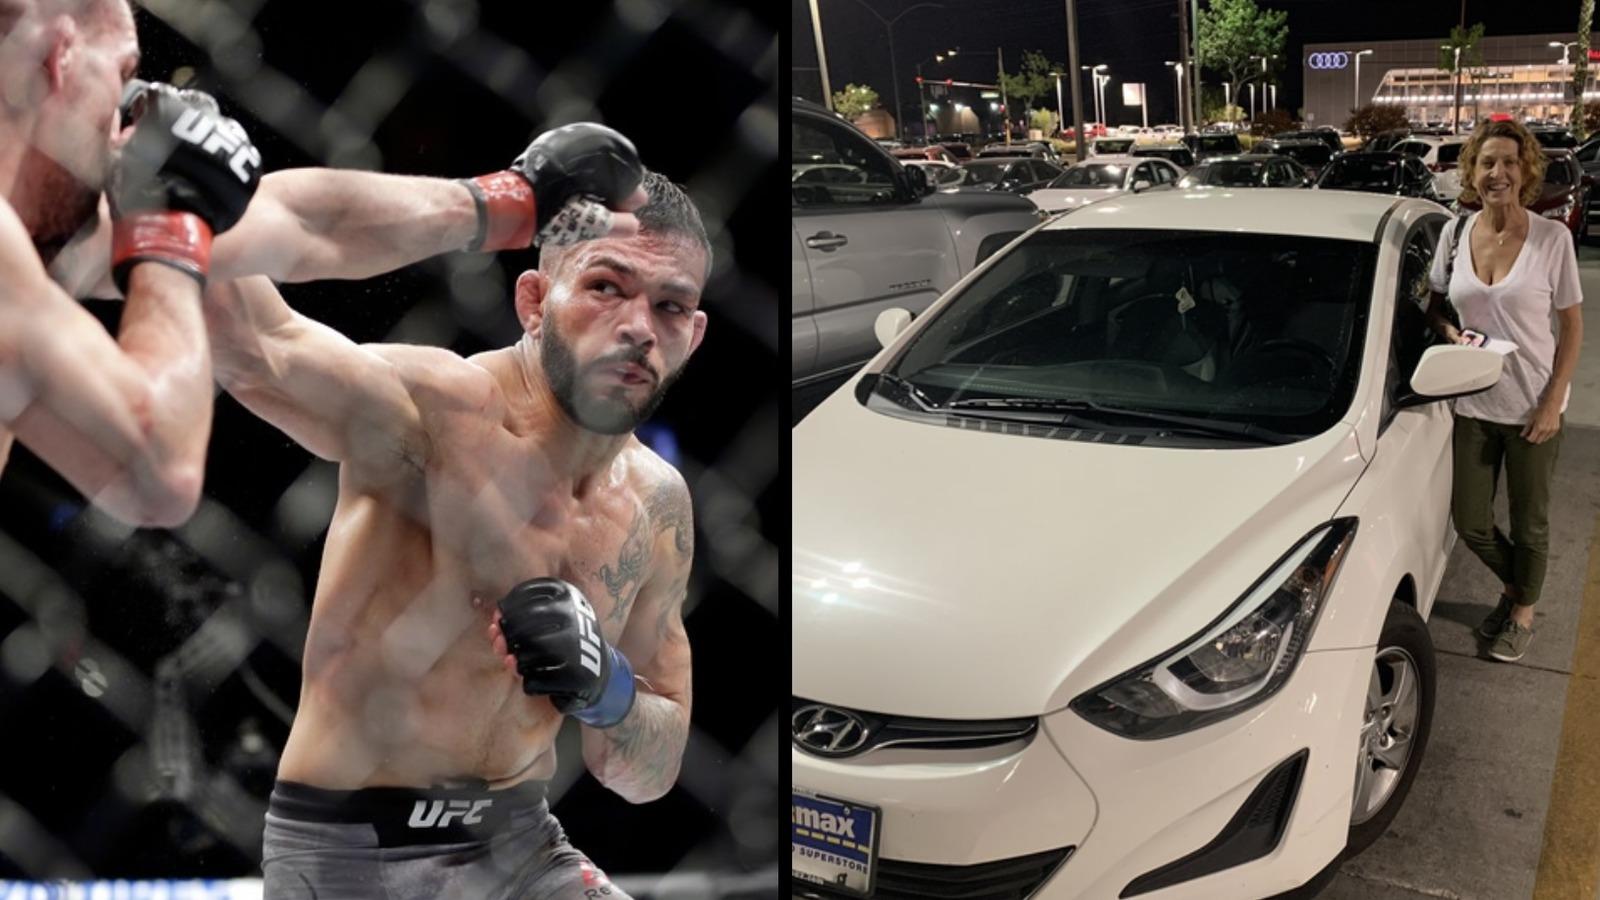 UFC star Dan Ige is asking for help after his mom’s car was stolen on Mother’s Day